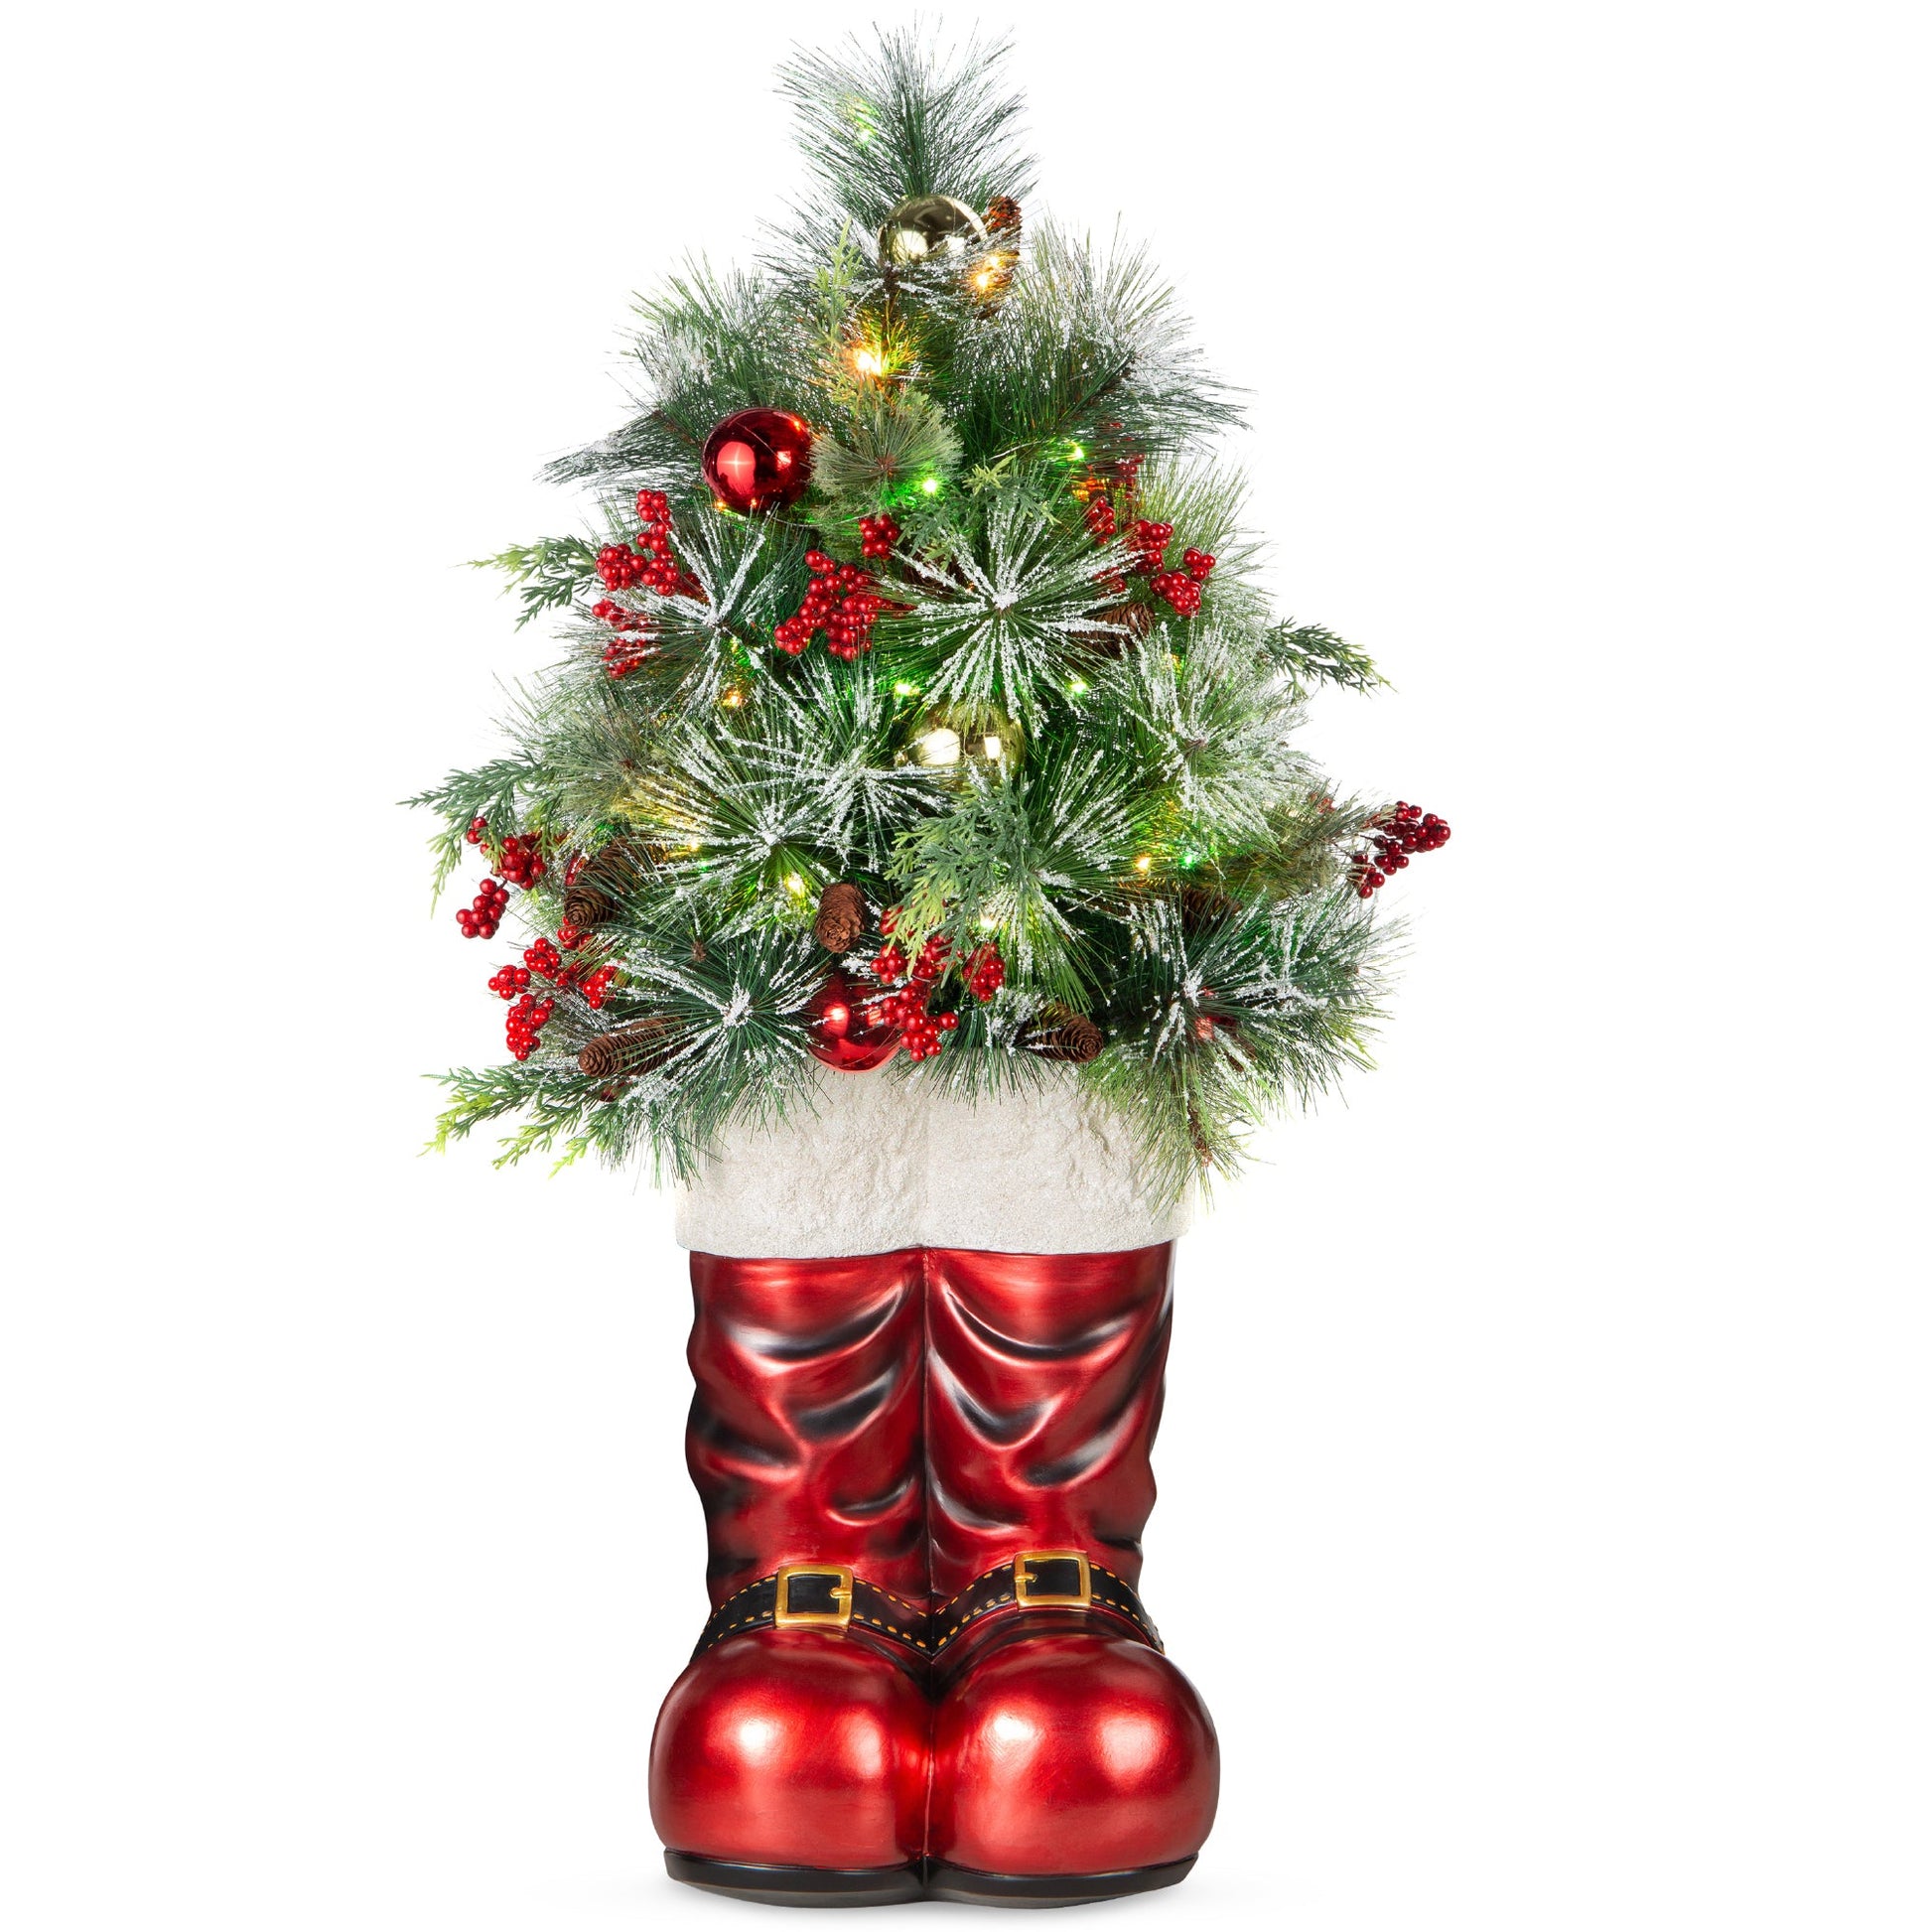 Santa Boots w/ Pre-Decorated Christmas Greenery, Lights - 40in